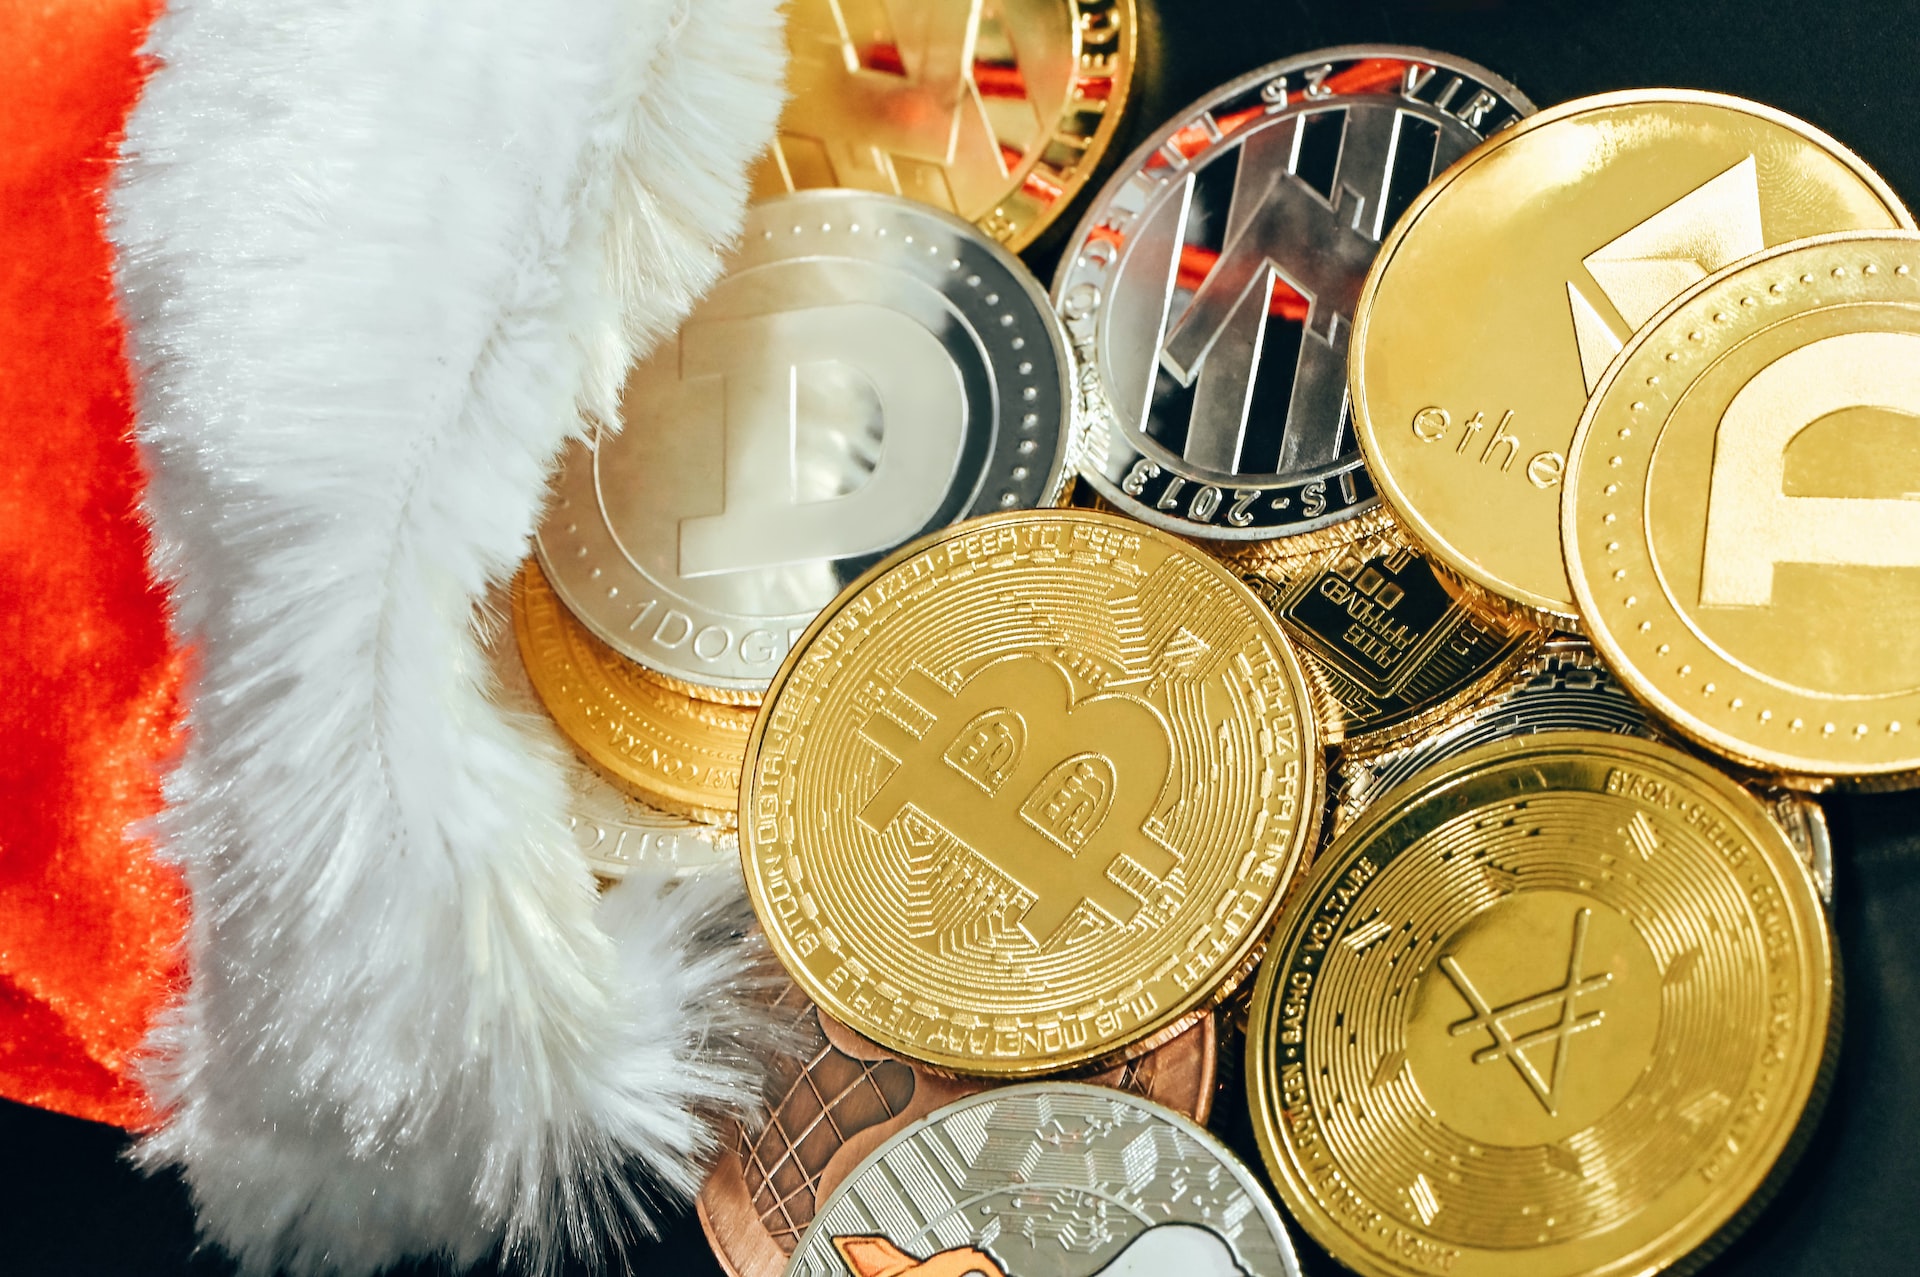 Crypto Price Prediction: XRP, Shiba Inu, ADA - Can These Coins Do 10x In 2022?